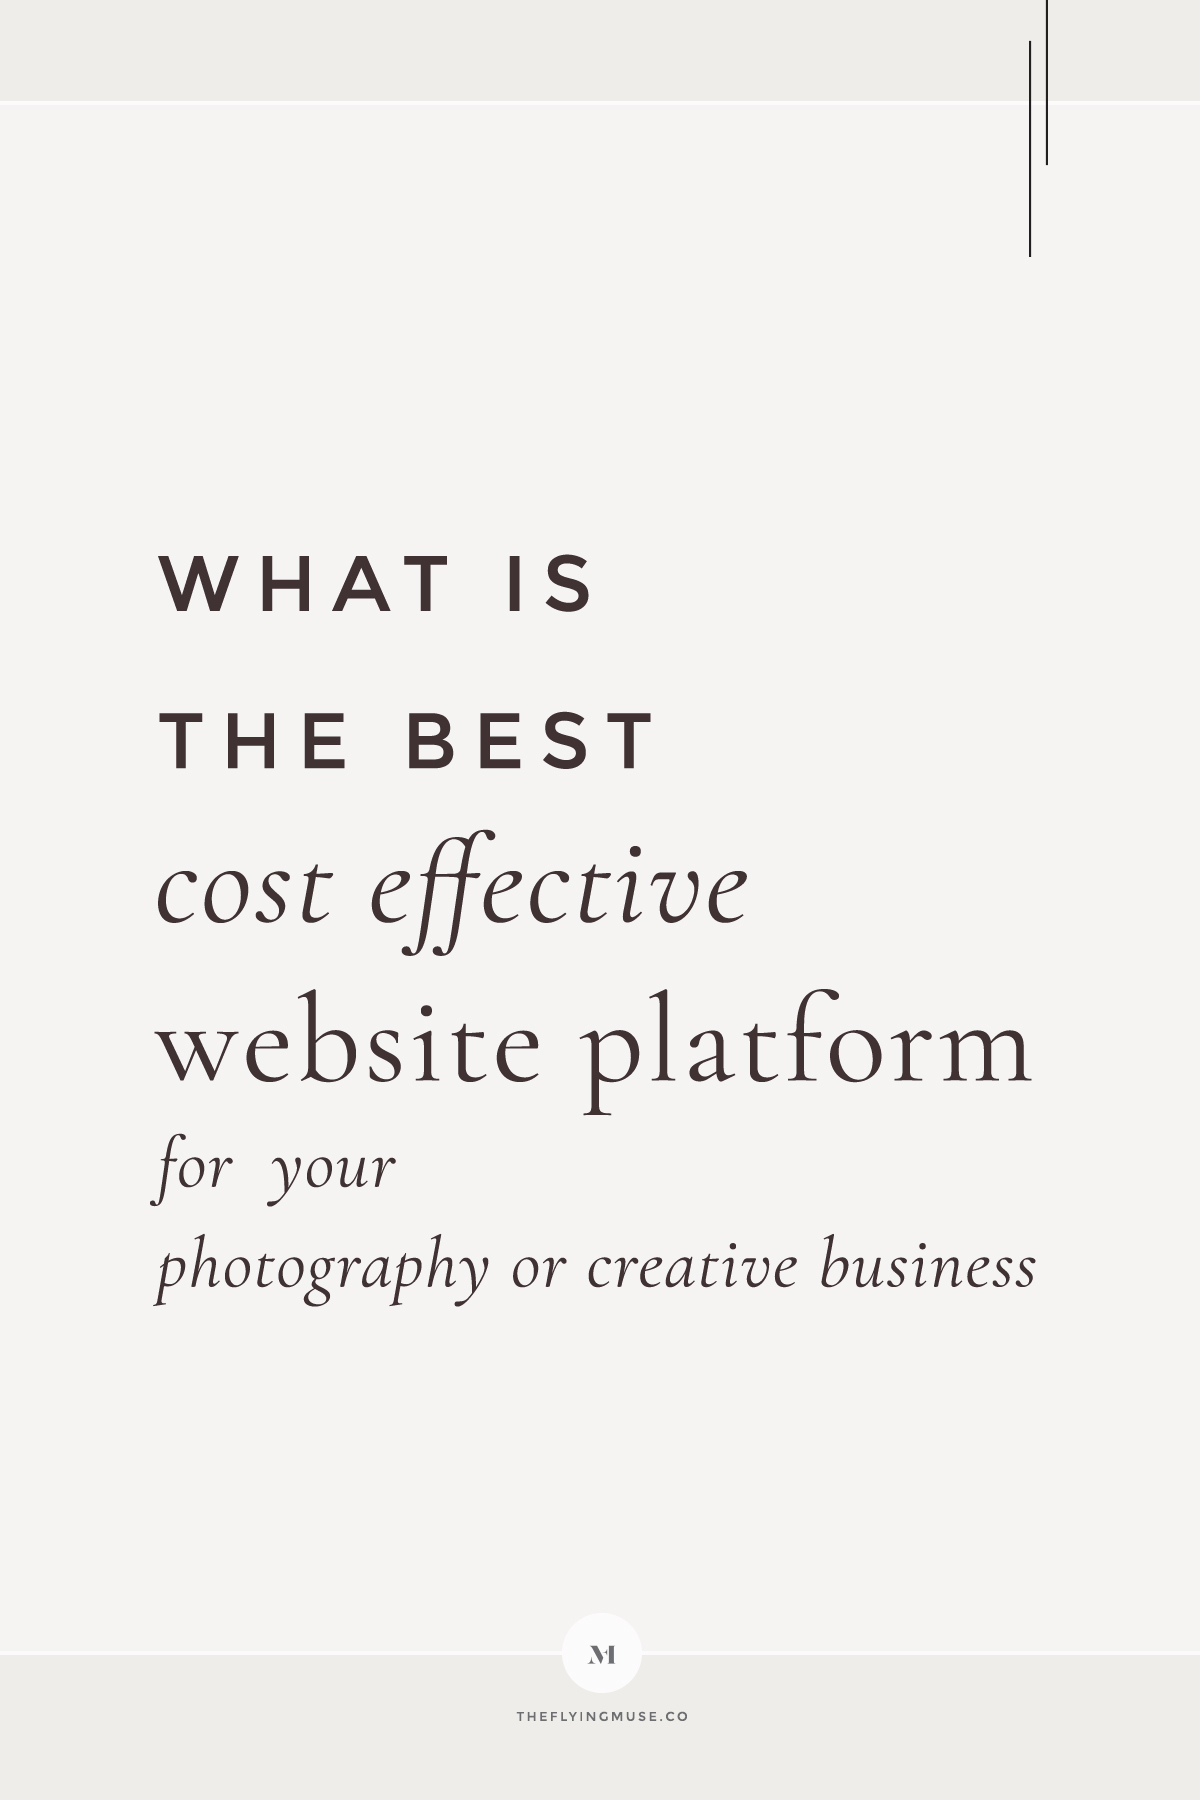 What is the Best cost effective website platform for your photography or creative business